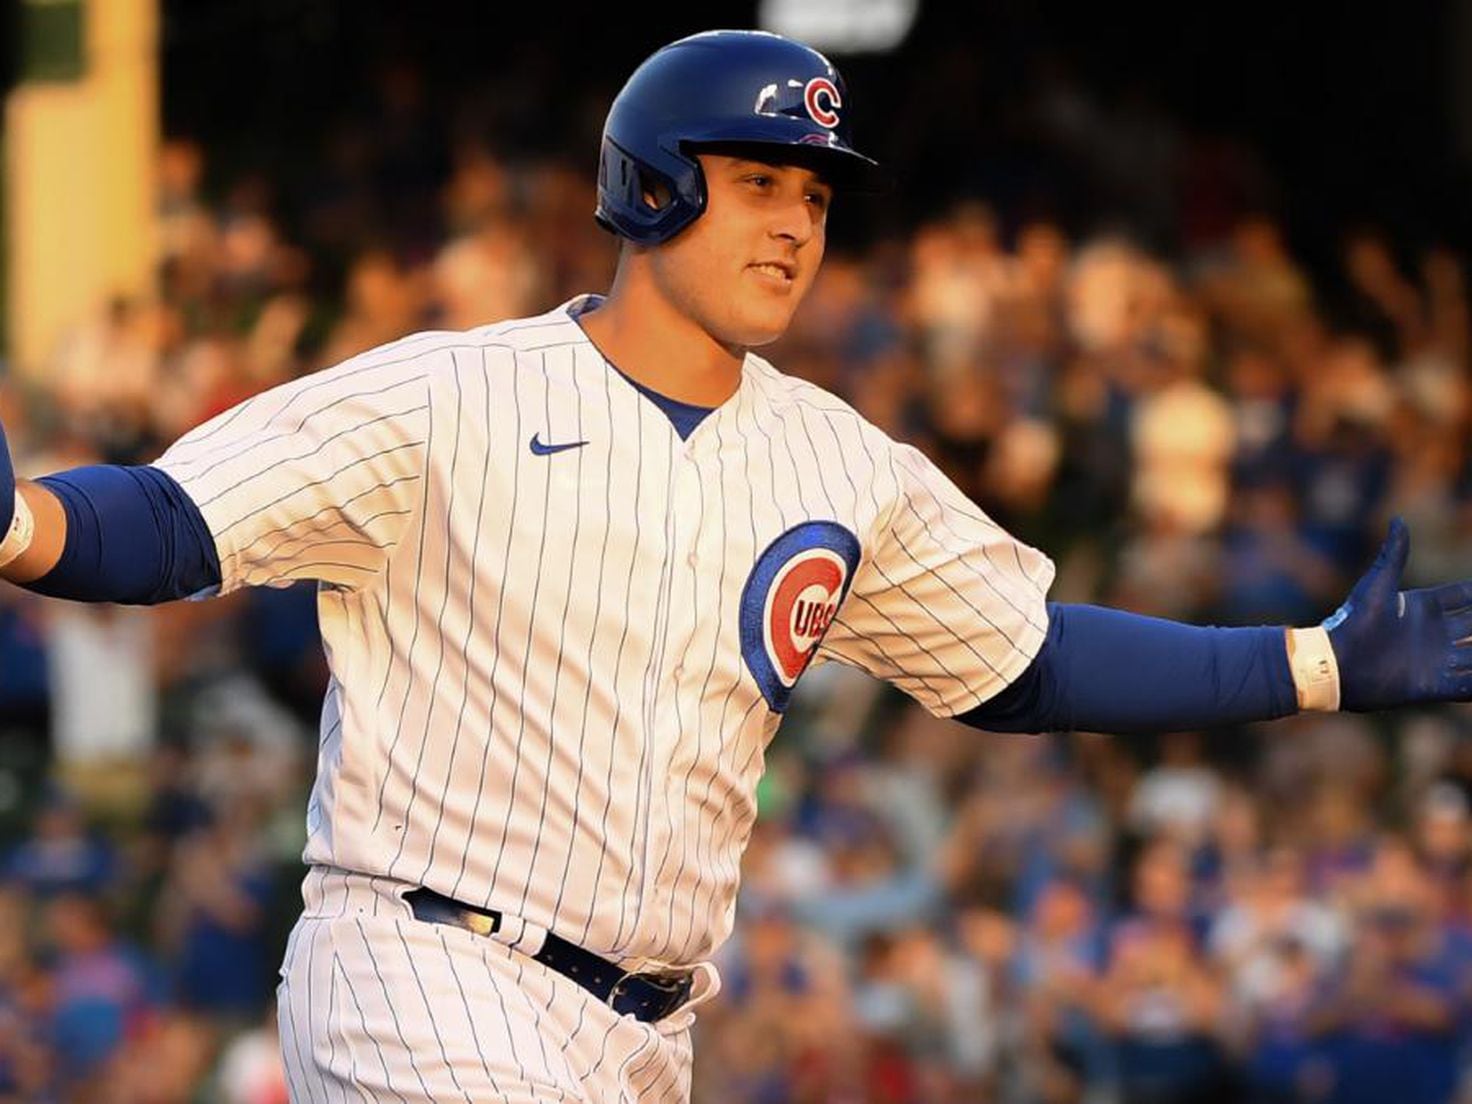 Yankees Anthony Rizzo is hitting like he did with the Cubs